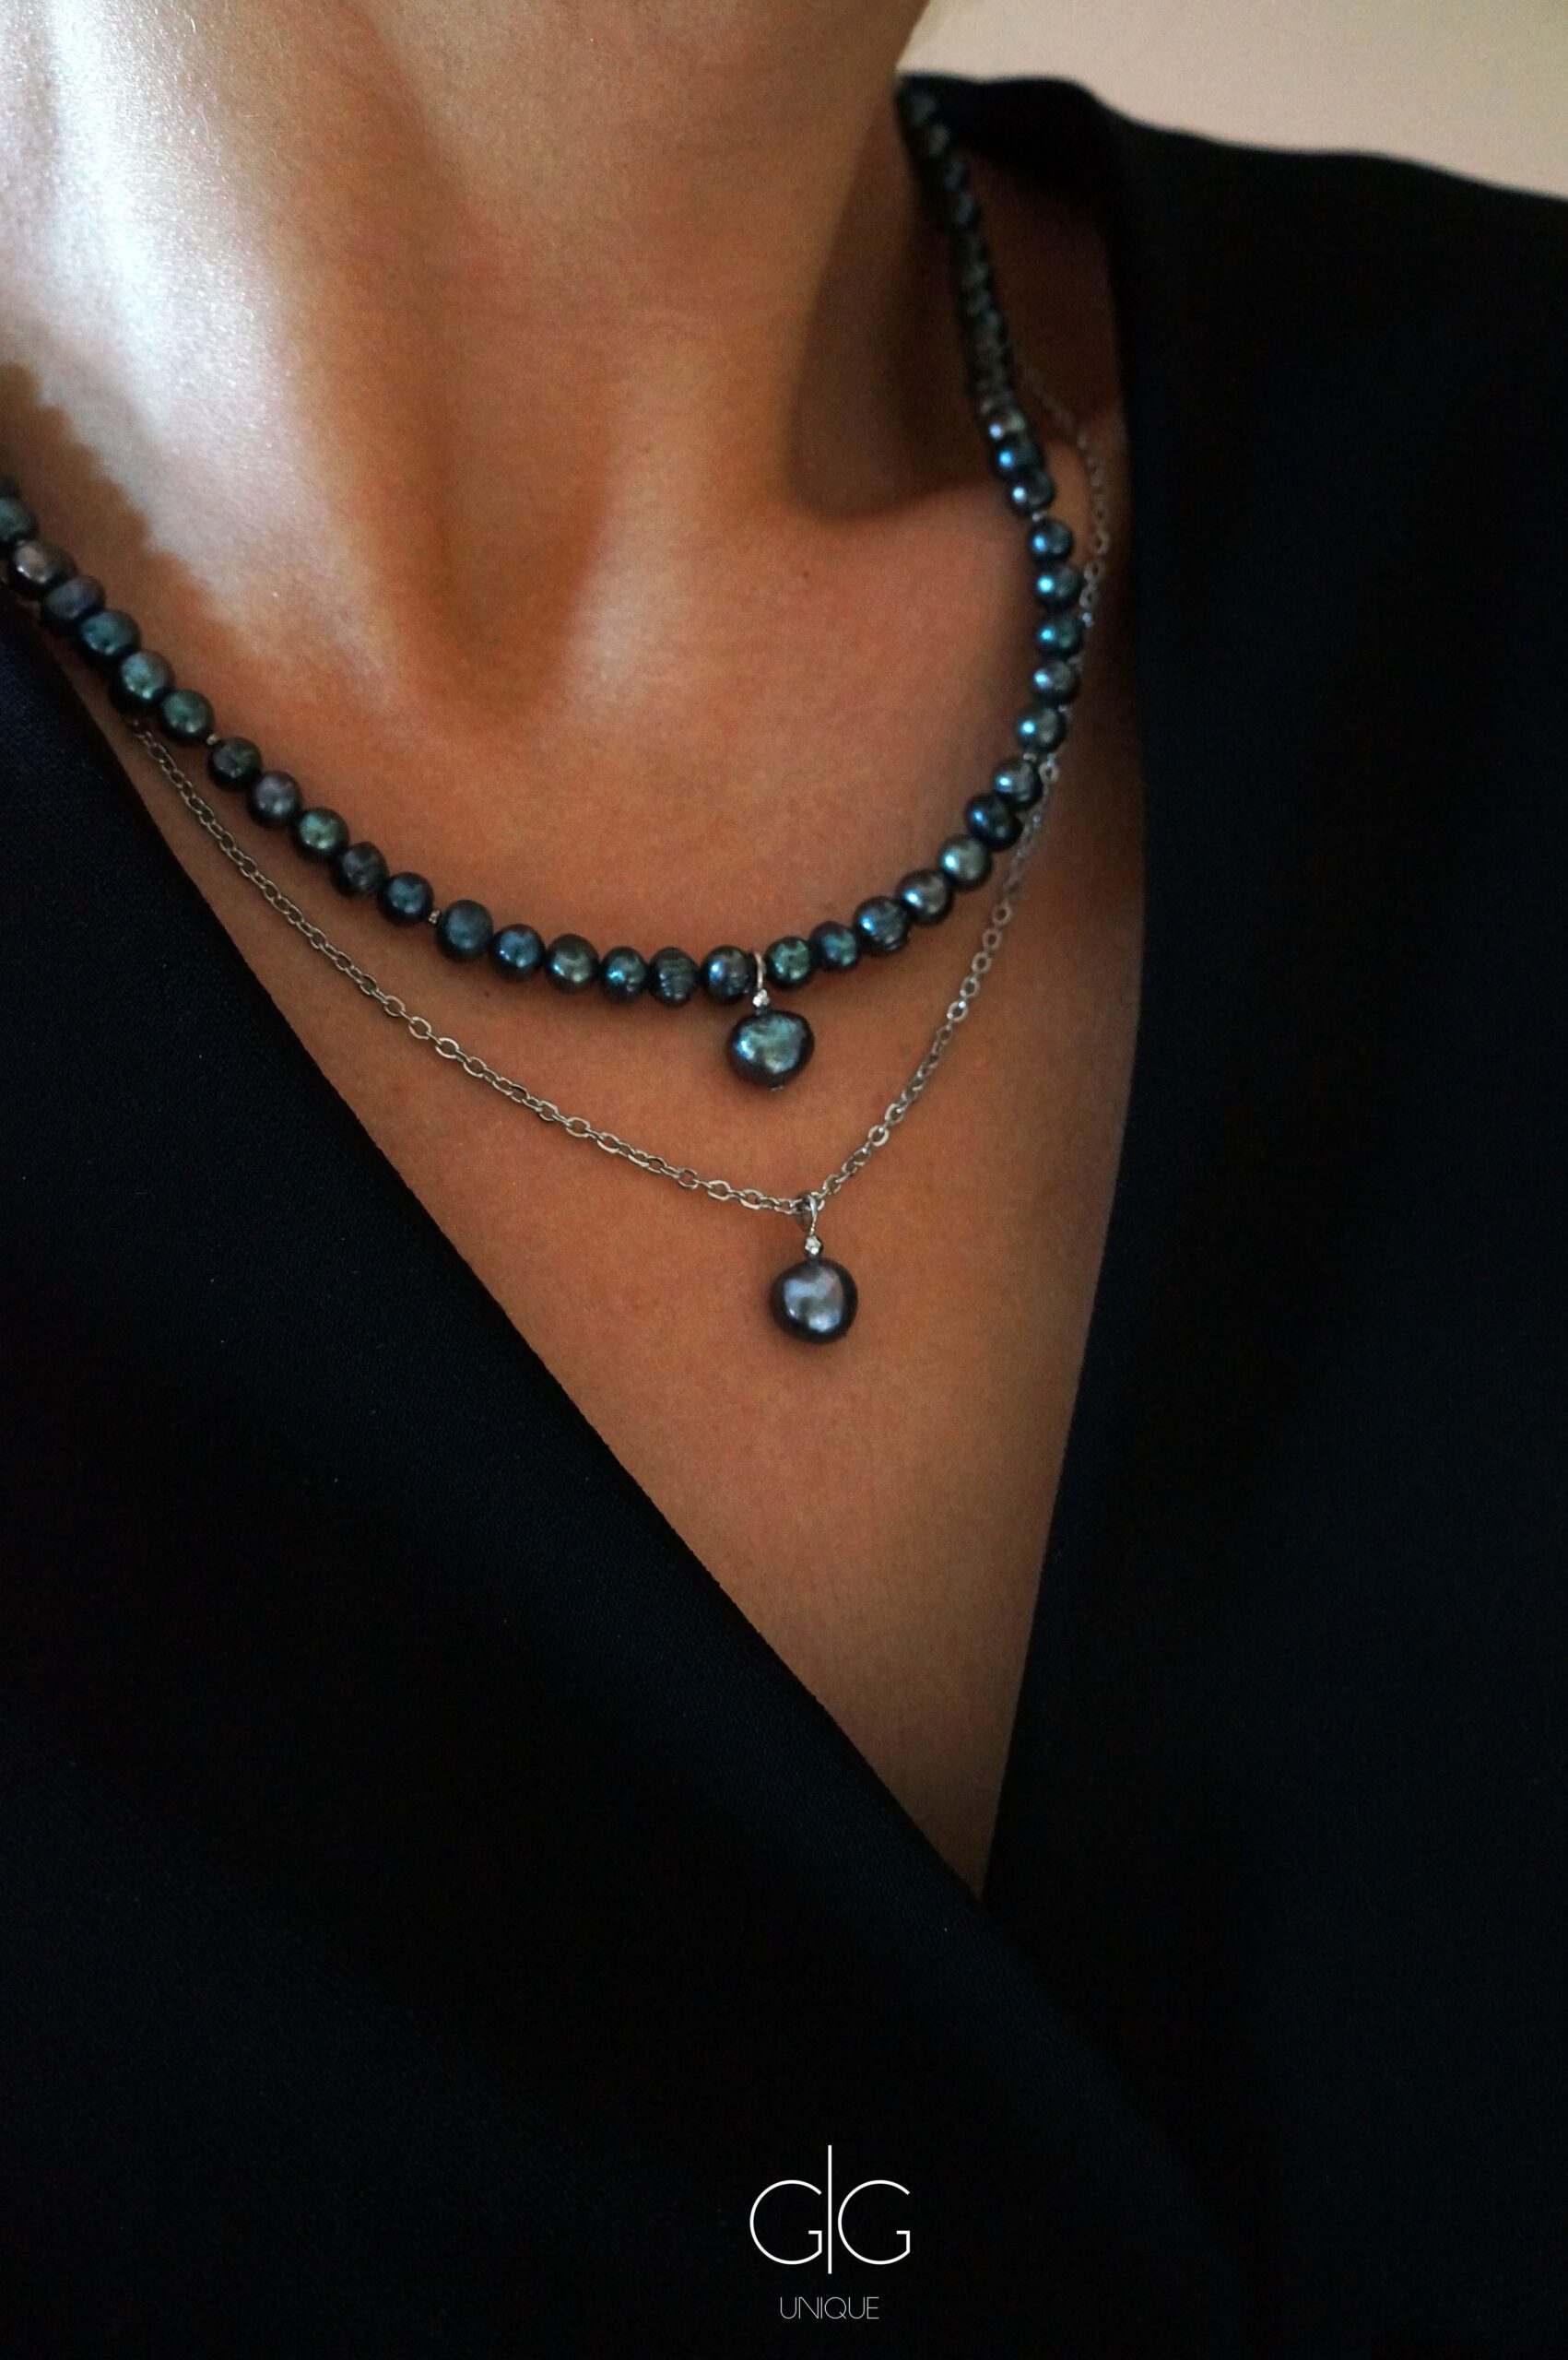 Dark freshwater pearl necklace with pearl pendant - GG UNIQUE